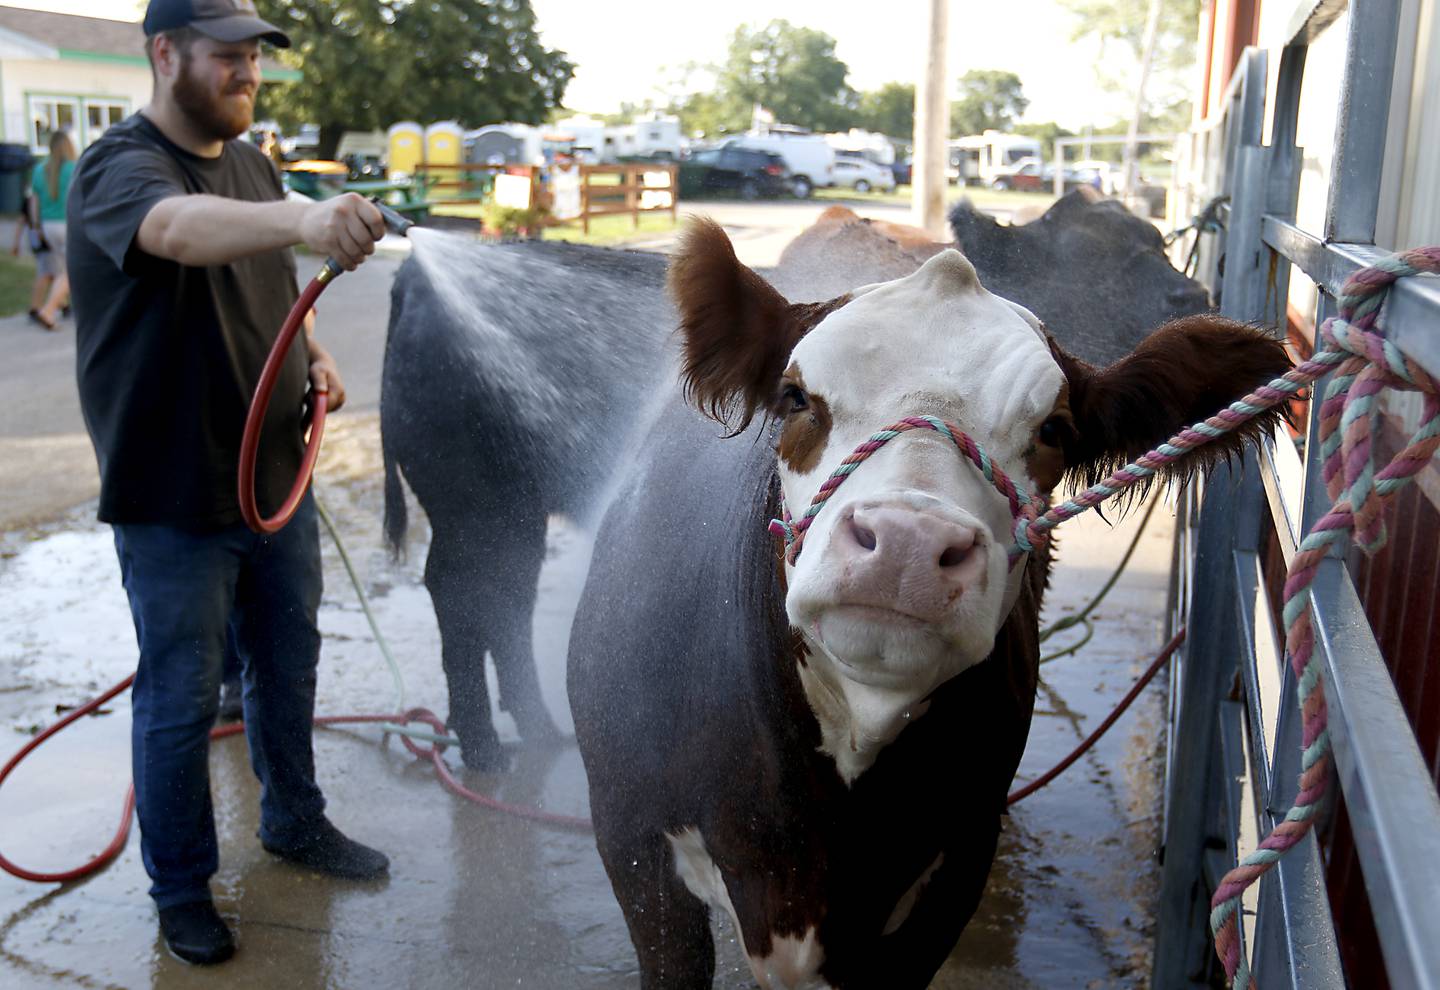 Dottie is not sure that she likes being cleaned by Marshall Petersen of Ebel Farms, during the first day of the McHenry County Fair Tuesday, August 2, 2022, at the fairgrounds in Woodstock. The fair funs through Sunday, Aug. 7.  Entry to the fair is $10 for anyone over age 14, and $5 for chidden ages 6 to 13. Ages 5 and under are free.